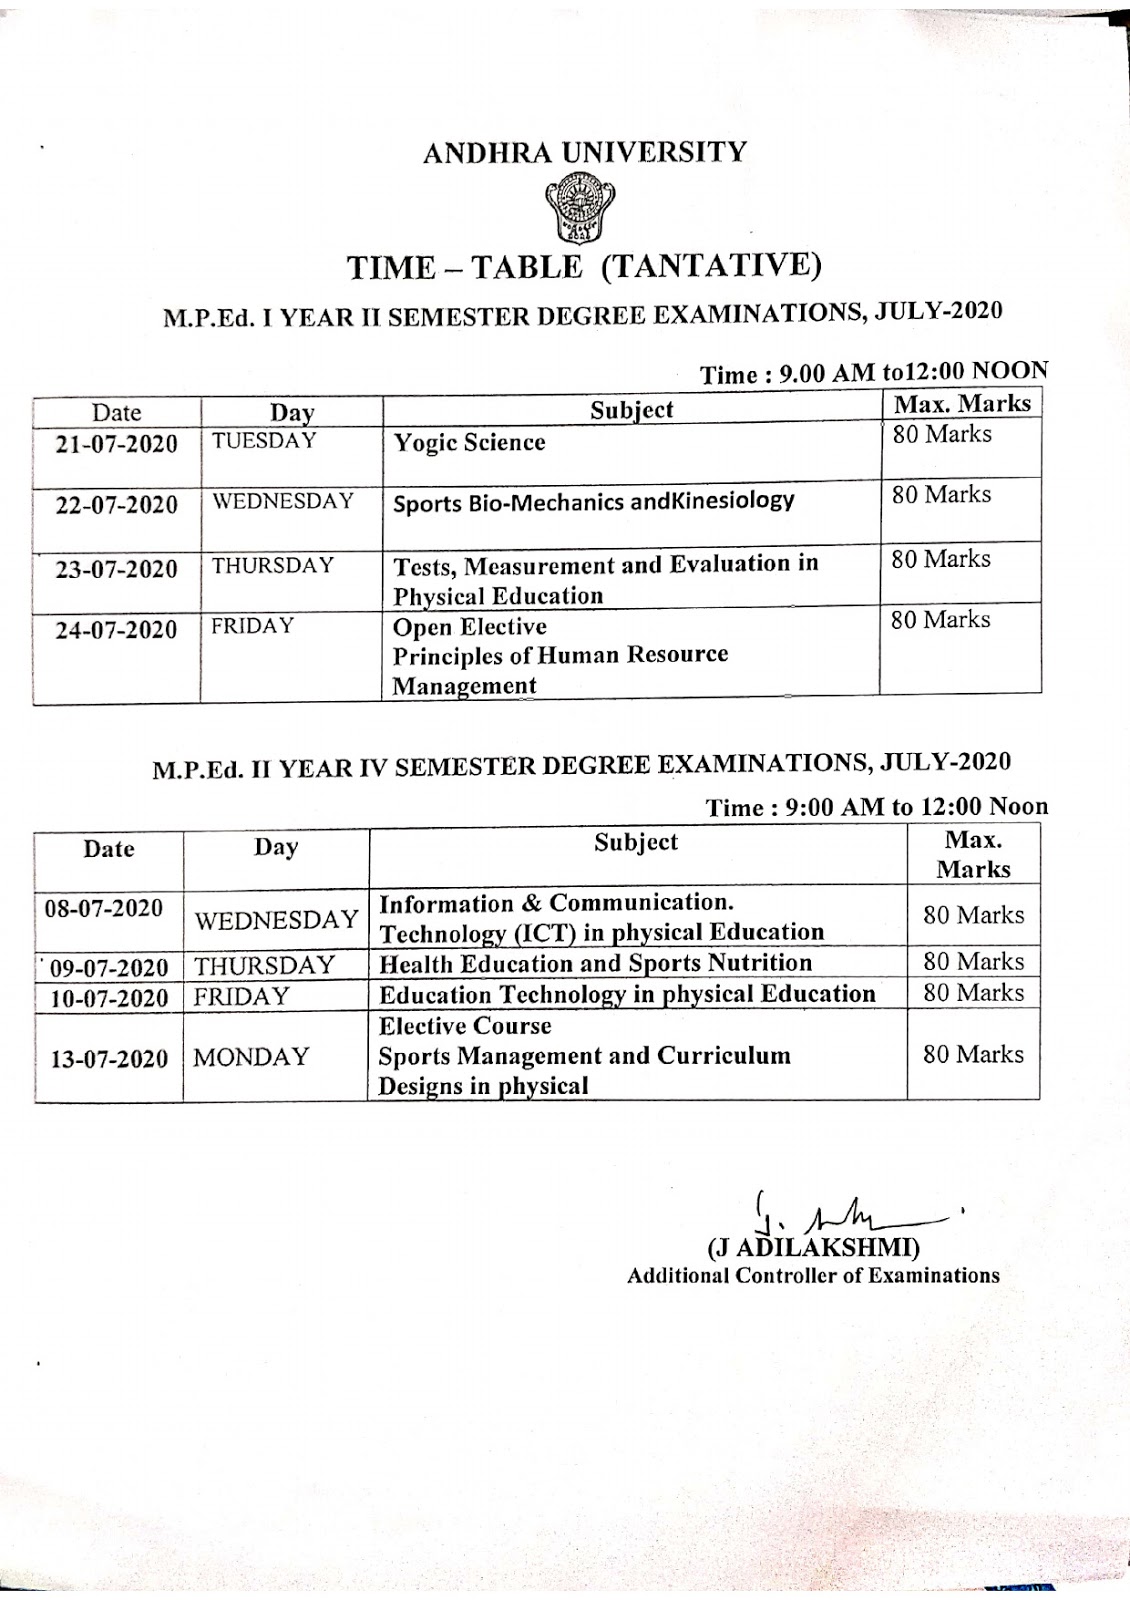 andhra university mped 2nd & 4th sem july 2020 exam time table